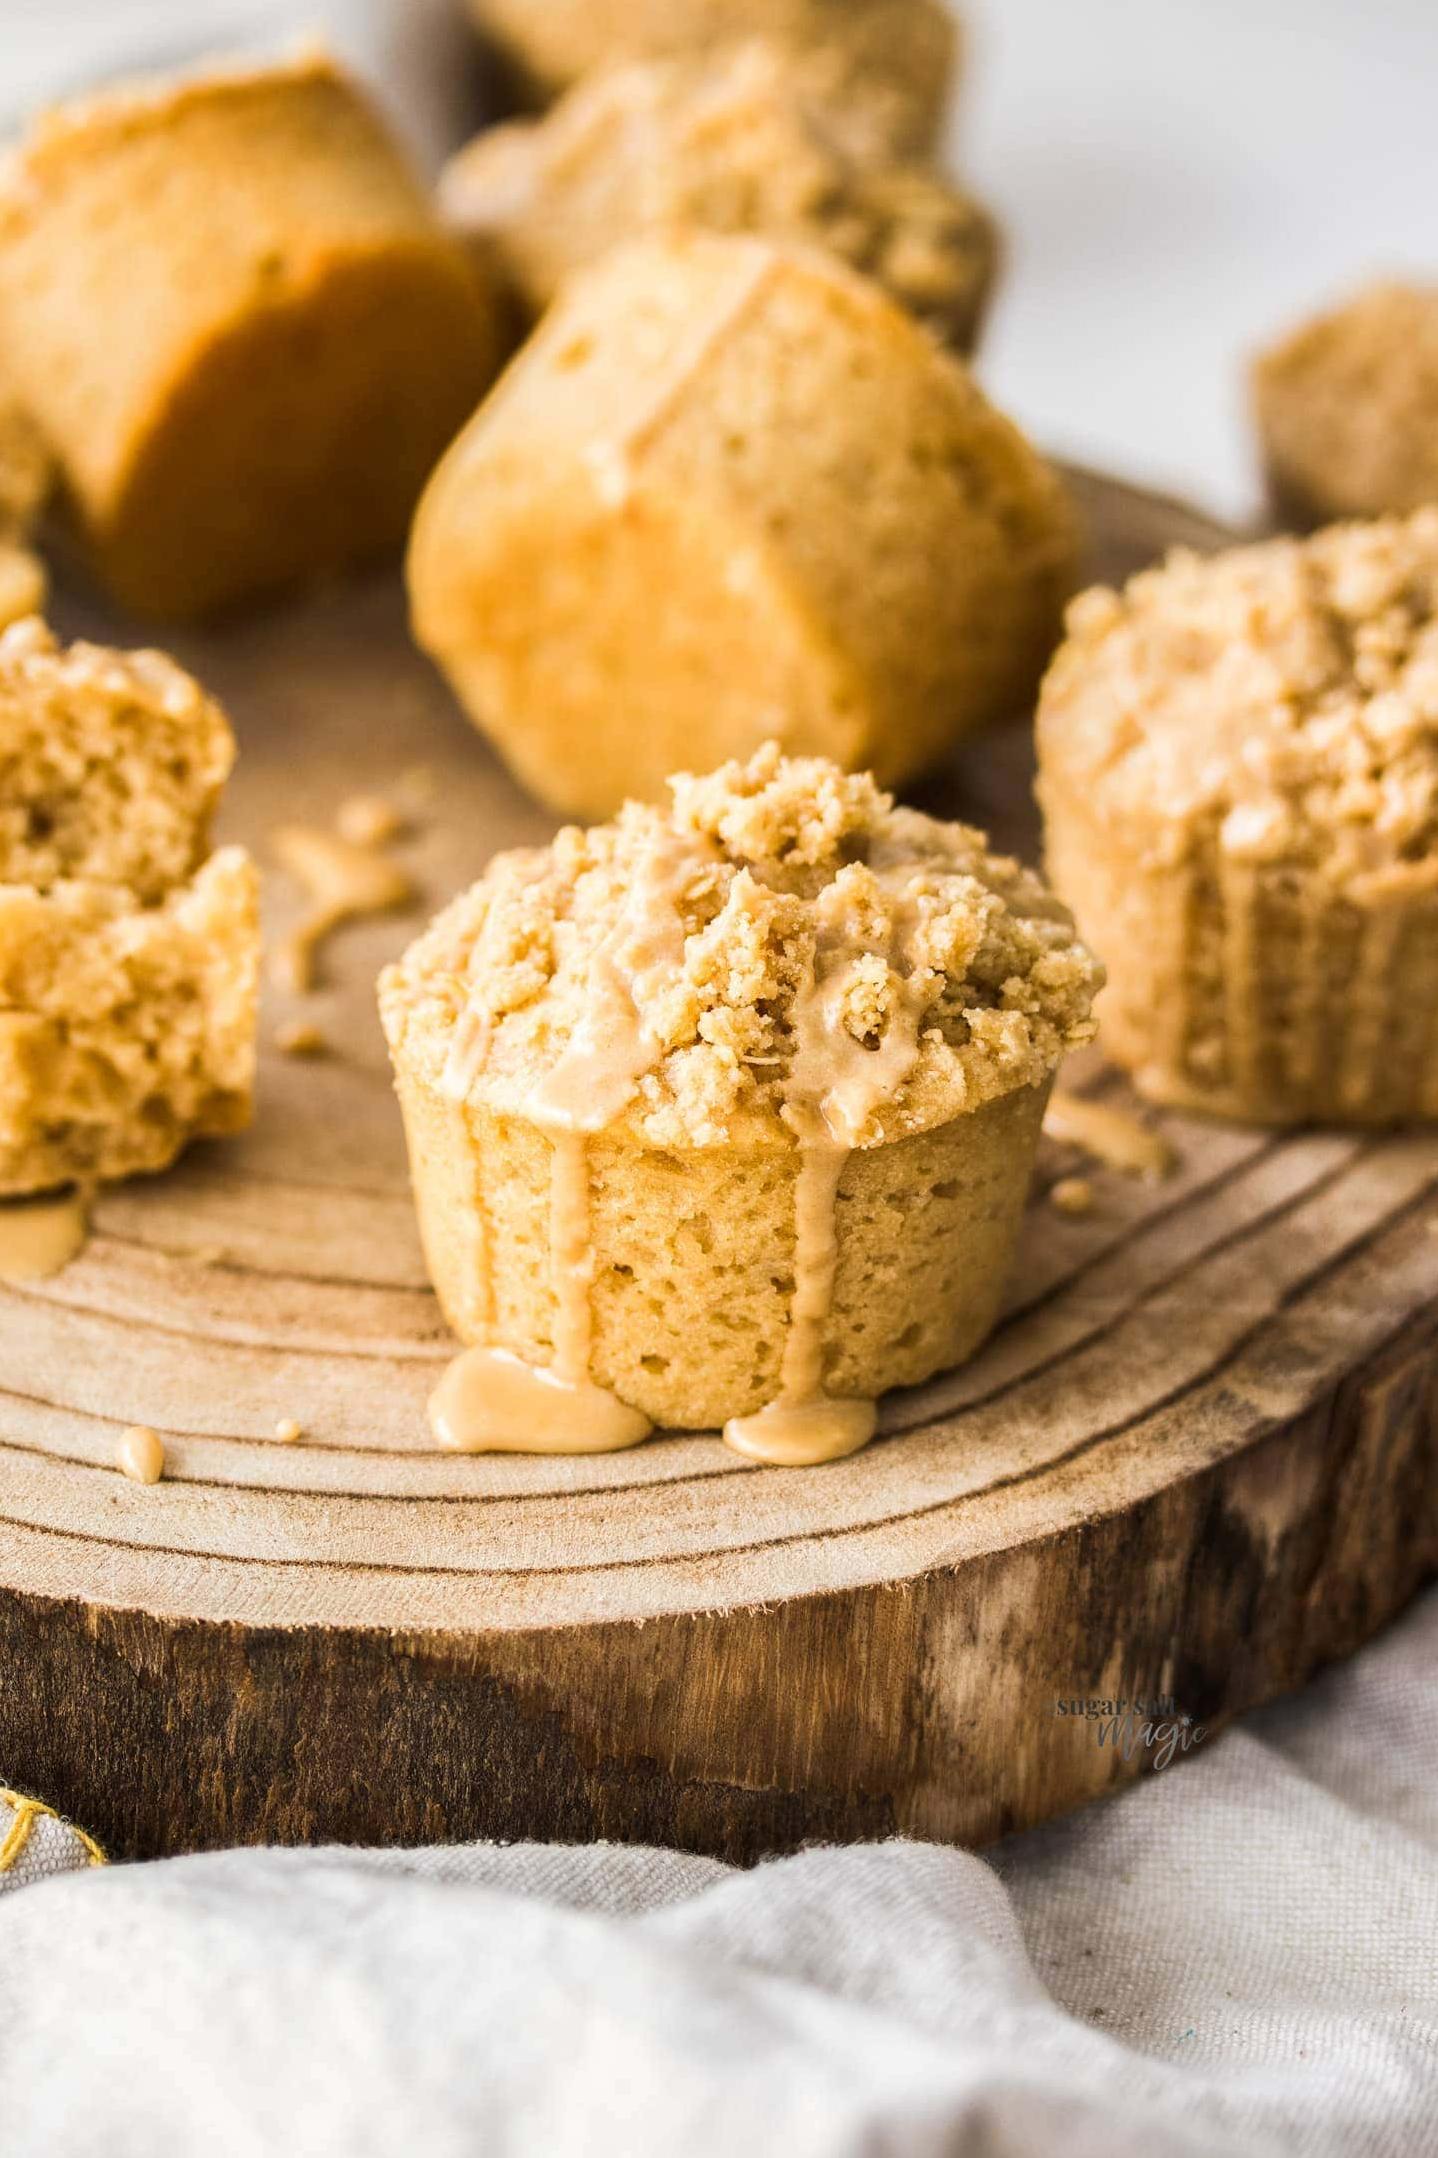  These deliciously moist muffins are like a warm hug in a mug.